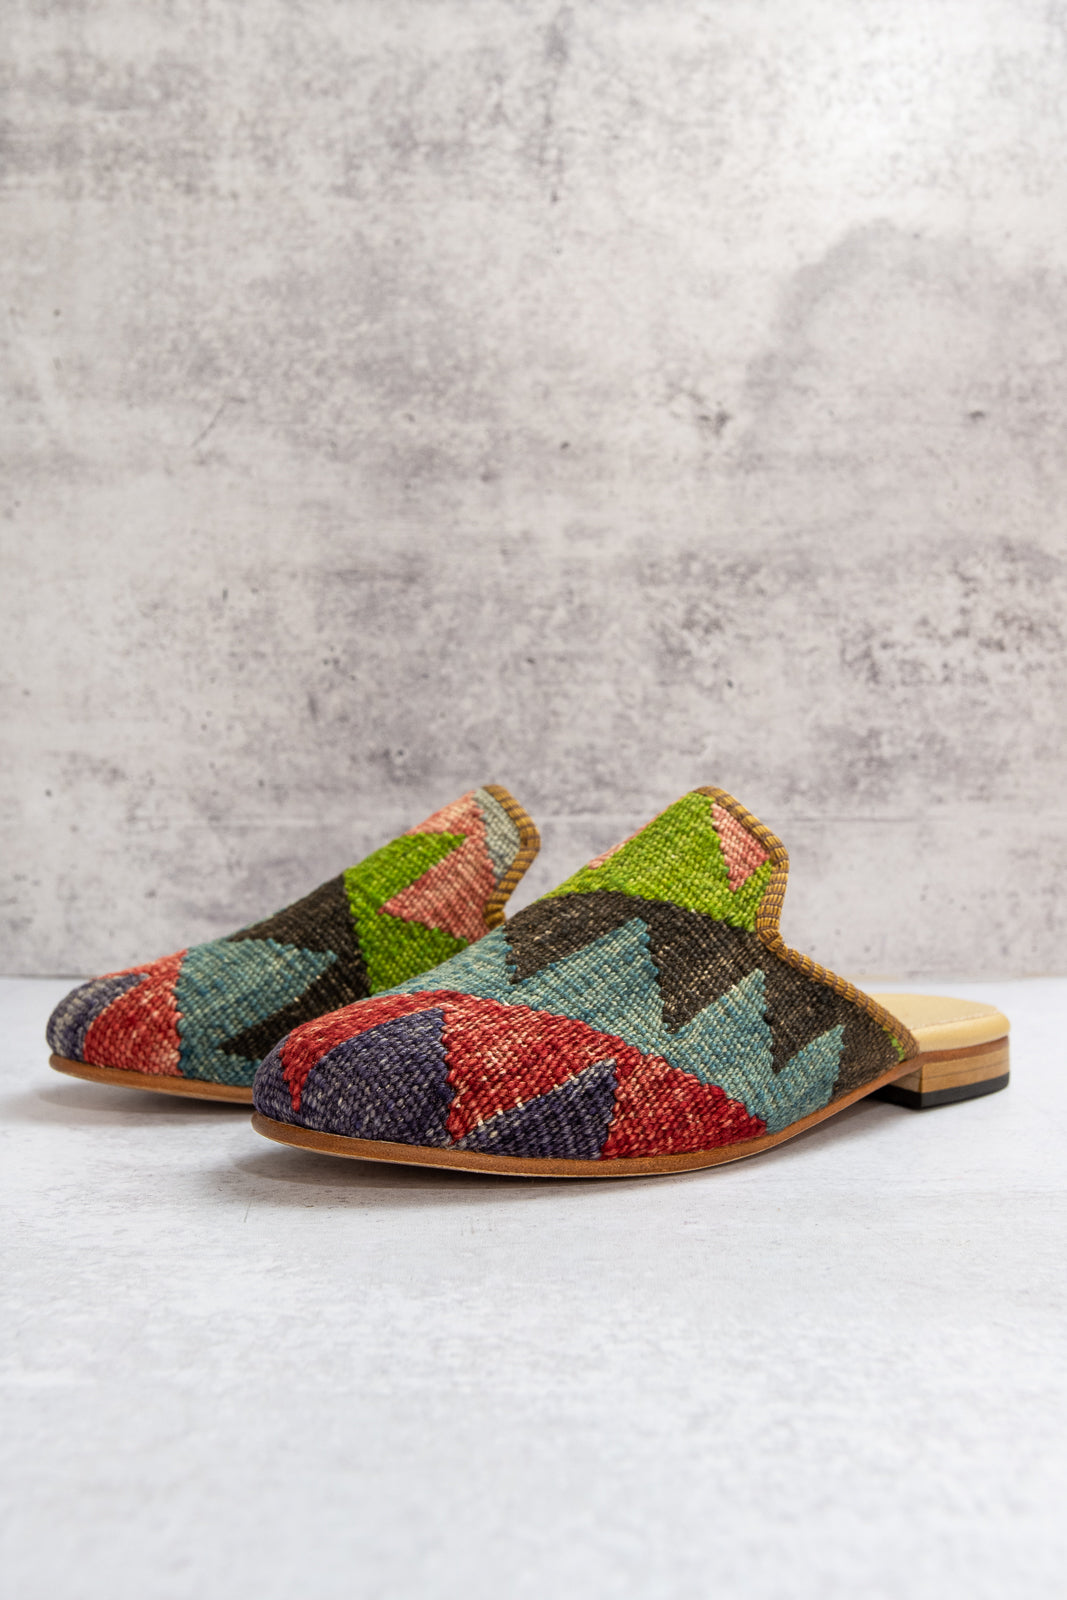 Kilim Mules for Women and Men - Genuine Leather Shoes – minimalchaos